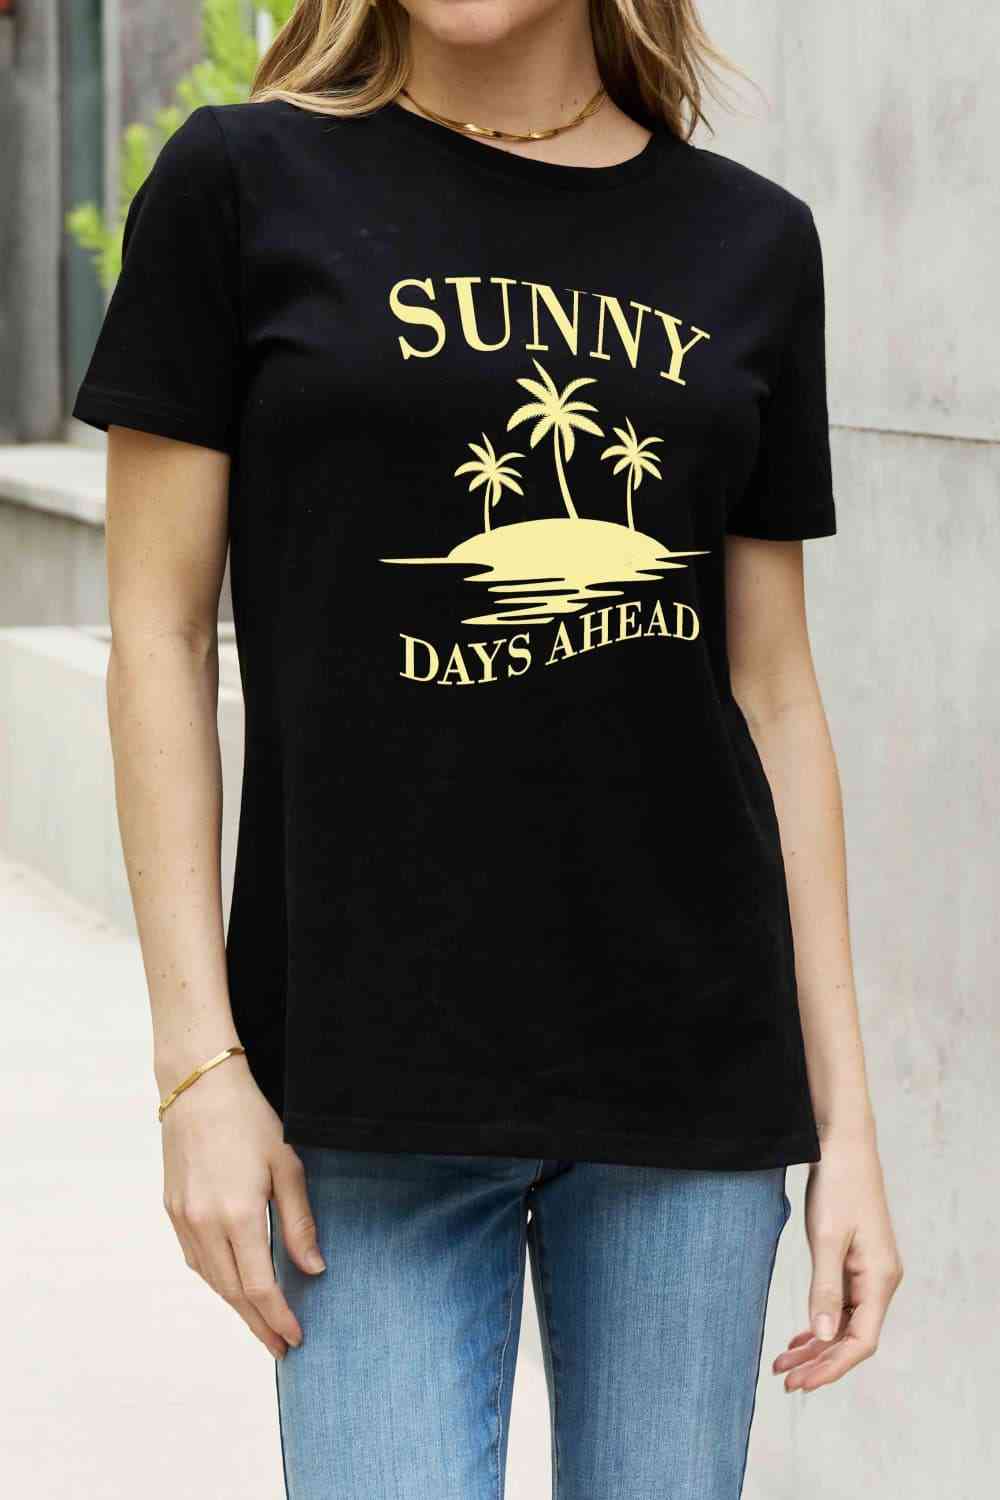 Simply Love Full Size SUNNY DAYS AHEAD Graphic Cotton Tee - TRENDMELO